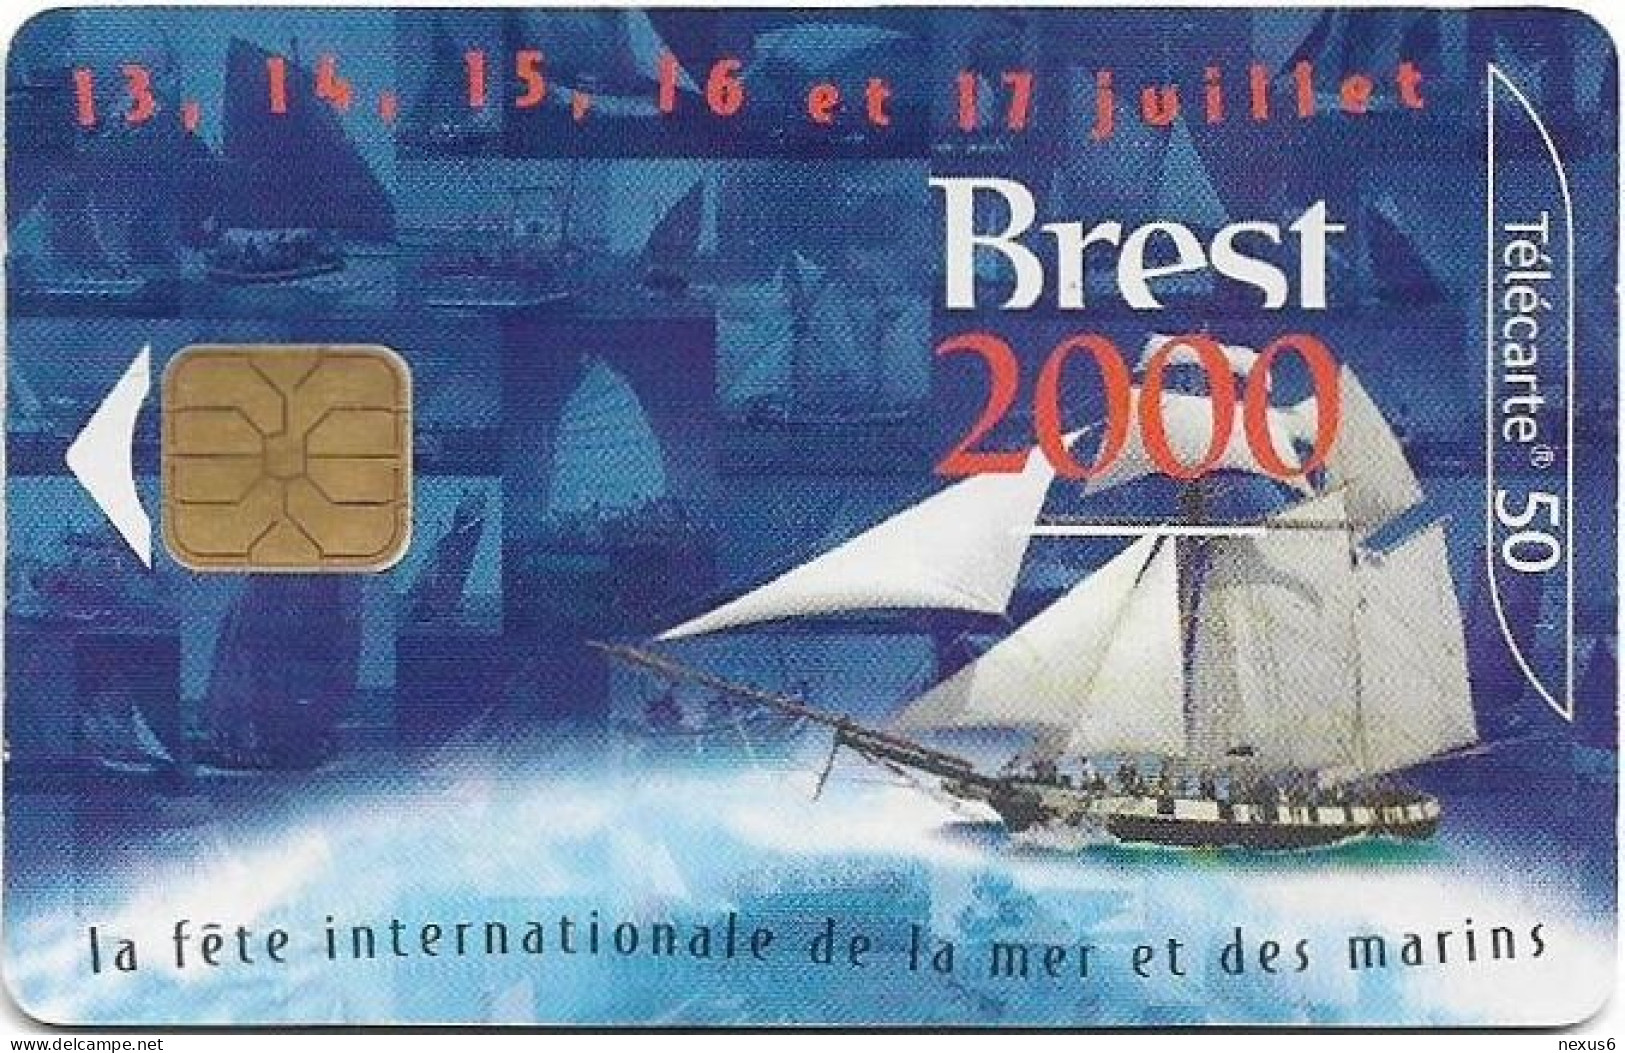 France - 1064.1 - Brest 2000, Chip ODS2, ''3'' On CN Rounded, 06.2000, 50Units, 200.000ex, Used - 2000